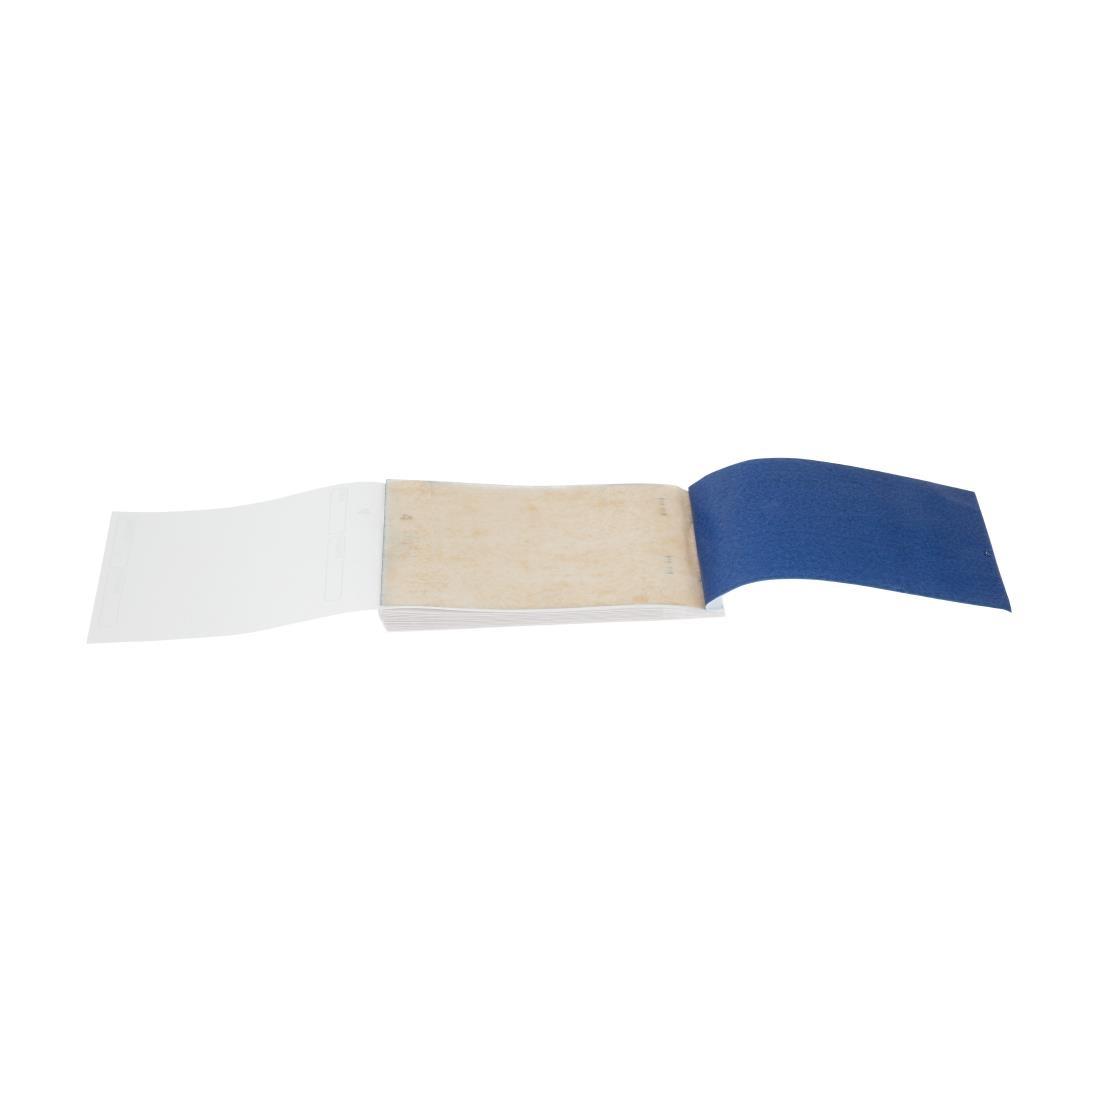 Restaurant Waiter Pads Duplicate Large (Pack of 50) - E168  - 4